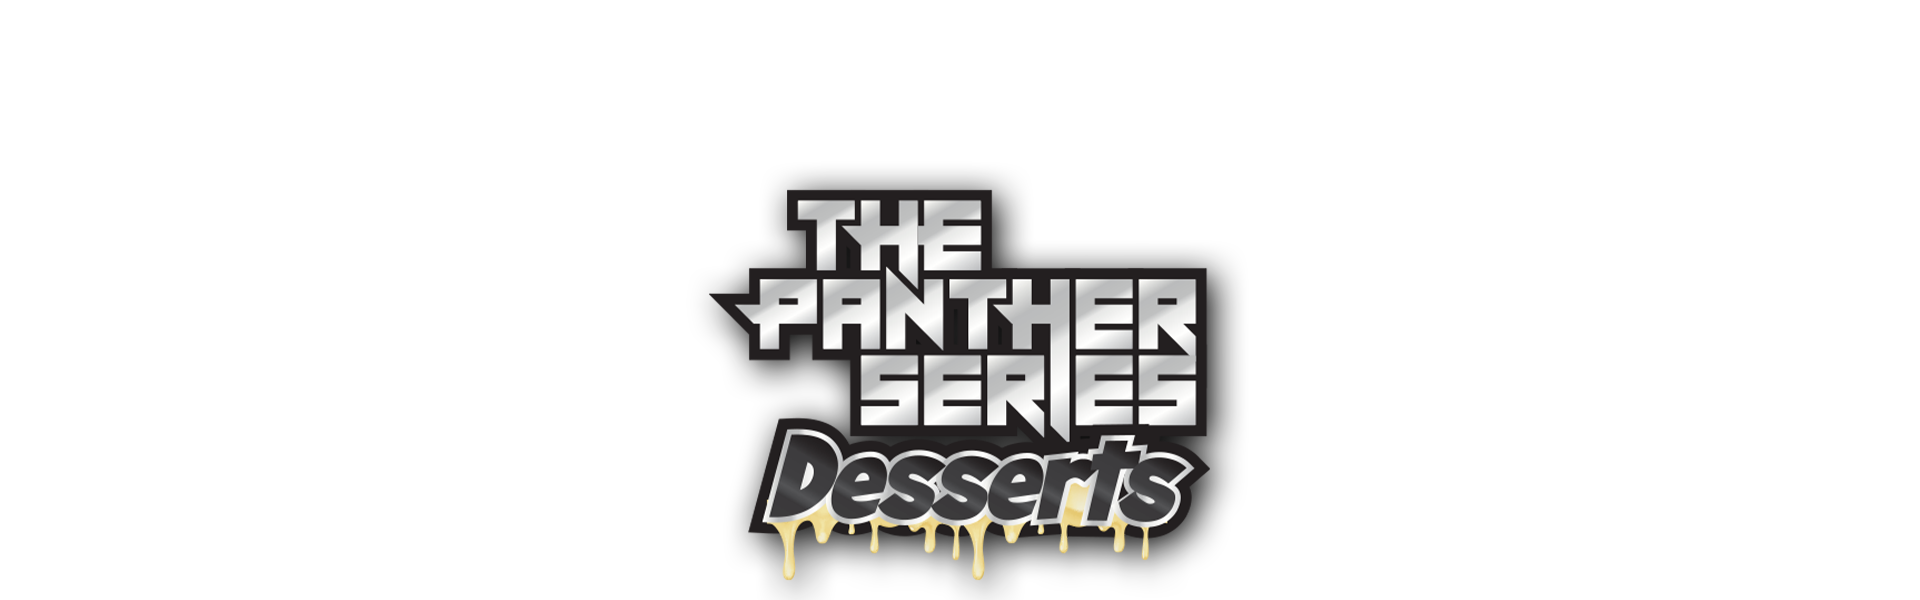 The Panther Series Desserts — Dr Vapes